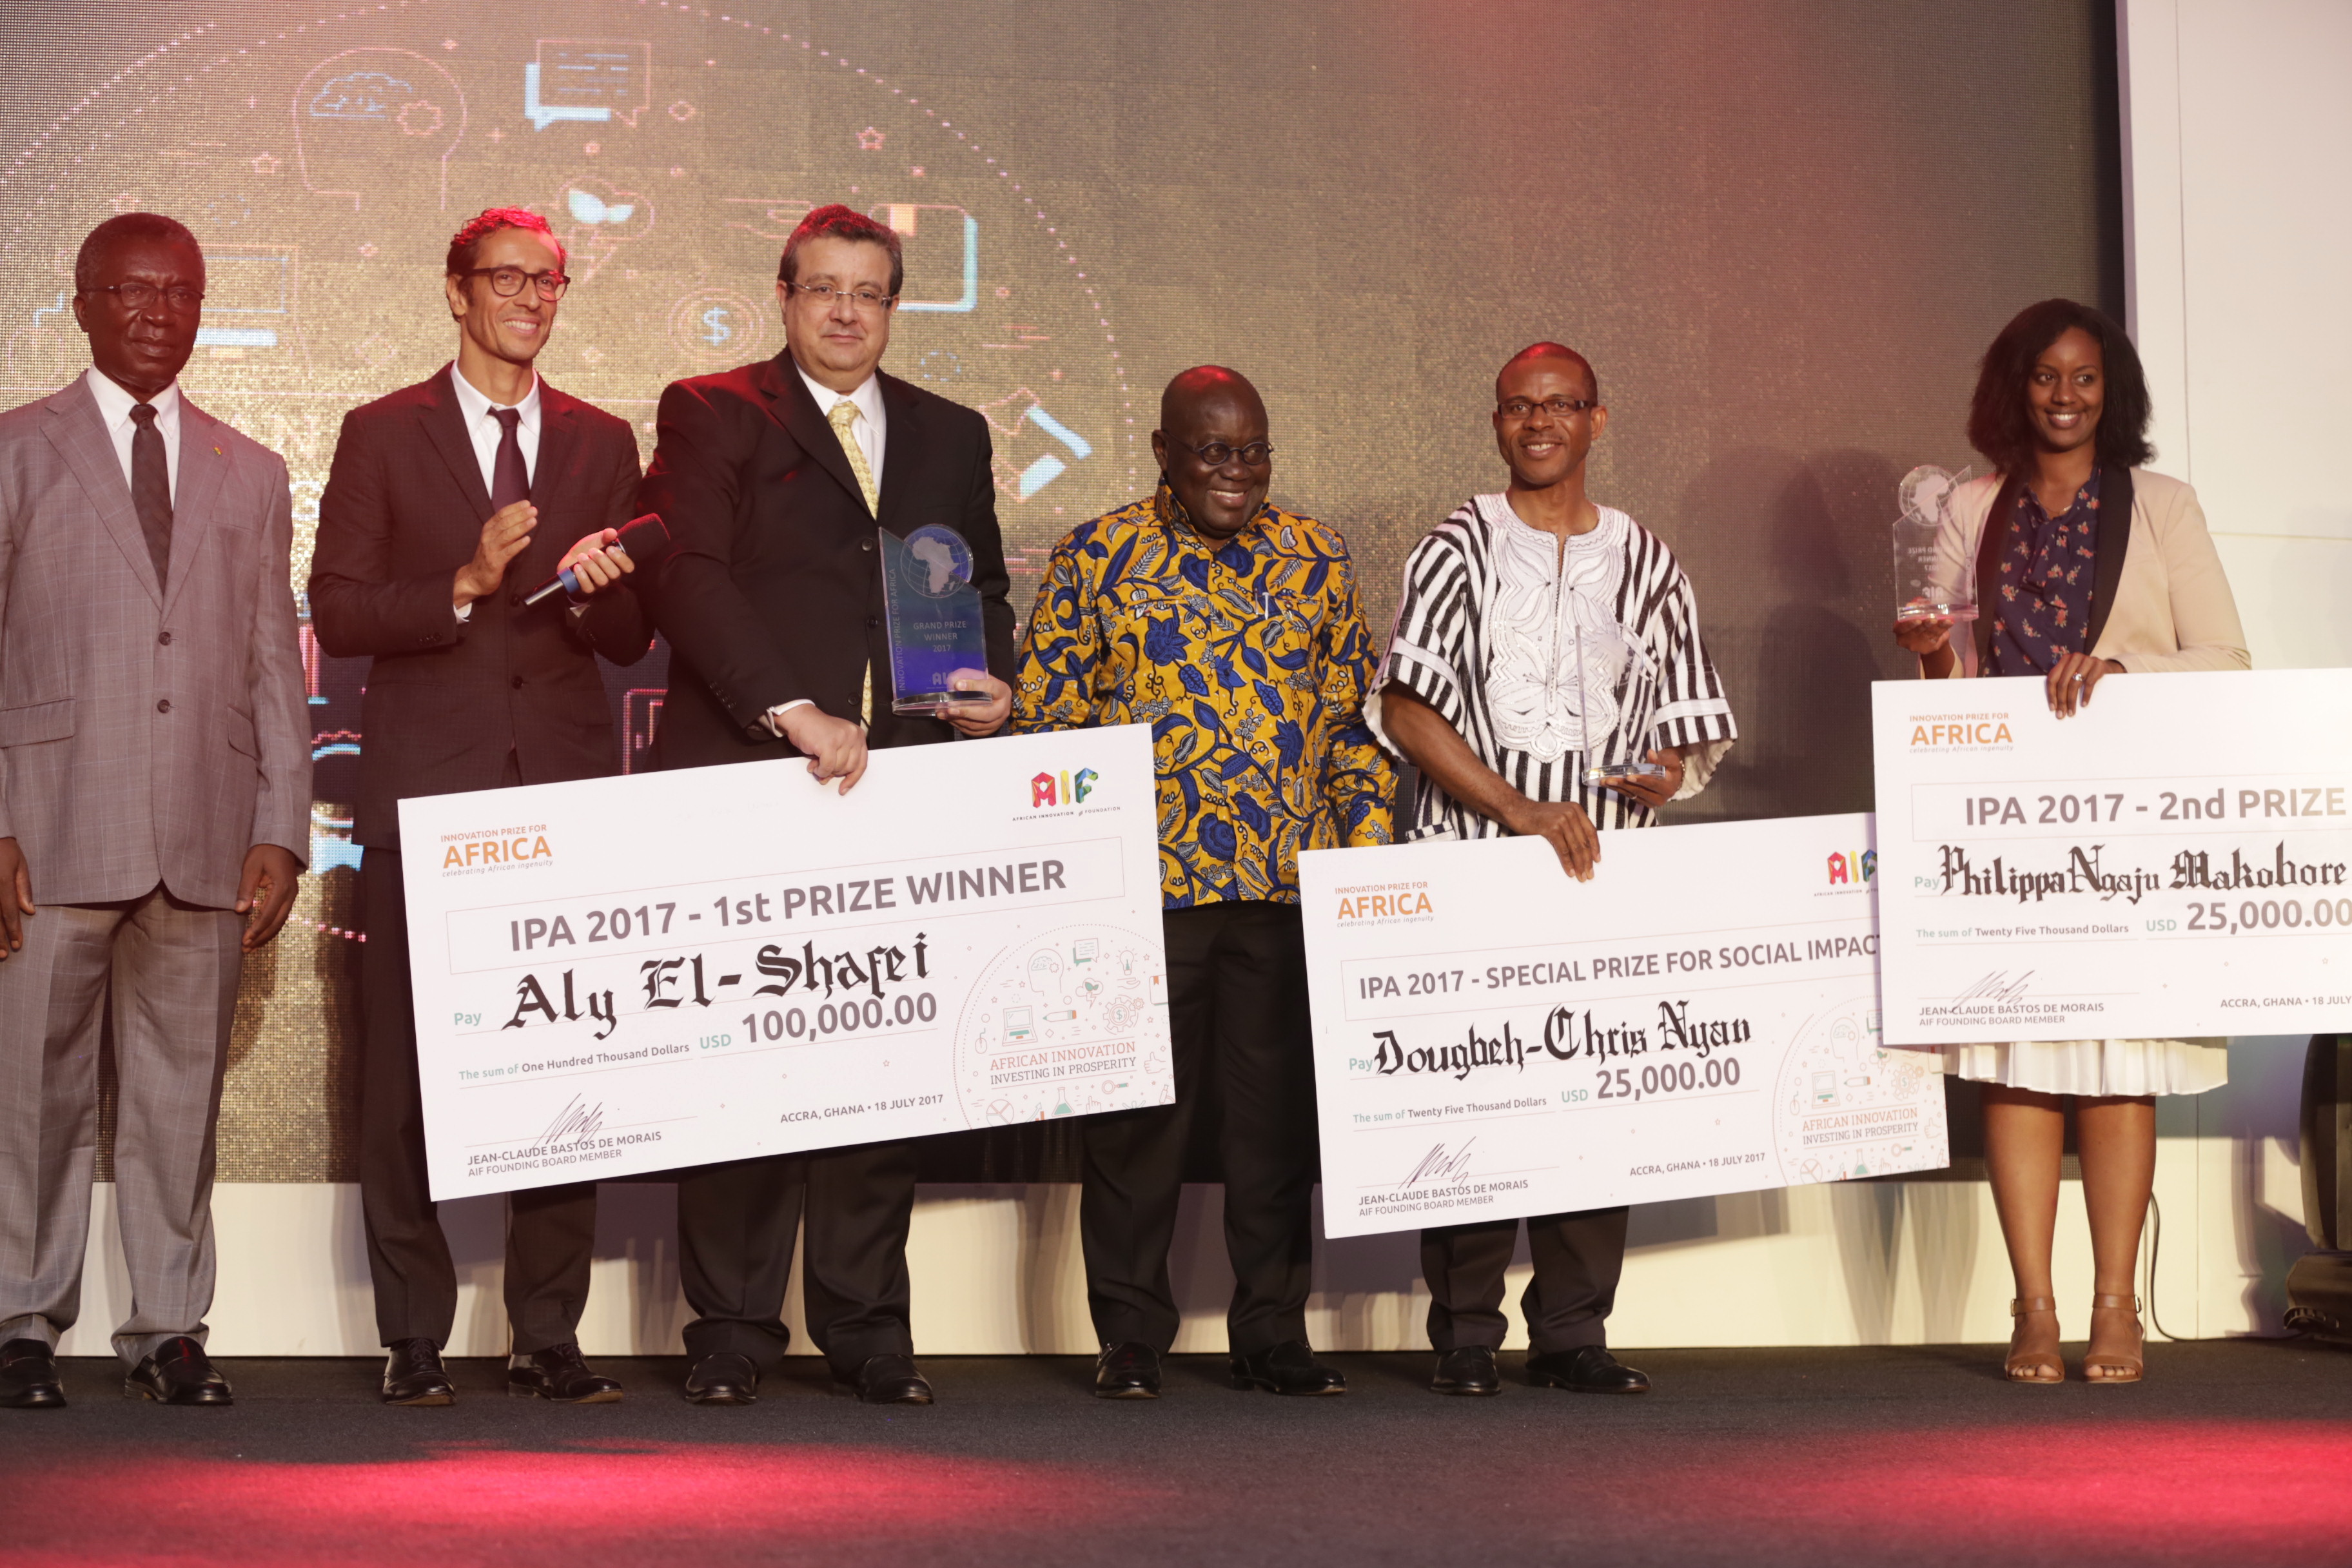 President Nana Addo Dankwah Akufo-Addo (3rd right), Prof. Kwabena Frimpong-Boateng (left), Minister of Environment, Science, Technology and Innovation, the Mr Jean-Claude Bastos De Morais (2nd left), founder, African Innovation Foundation (AIF), with the winners.